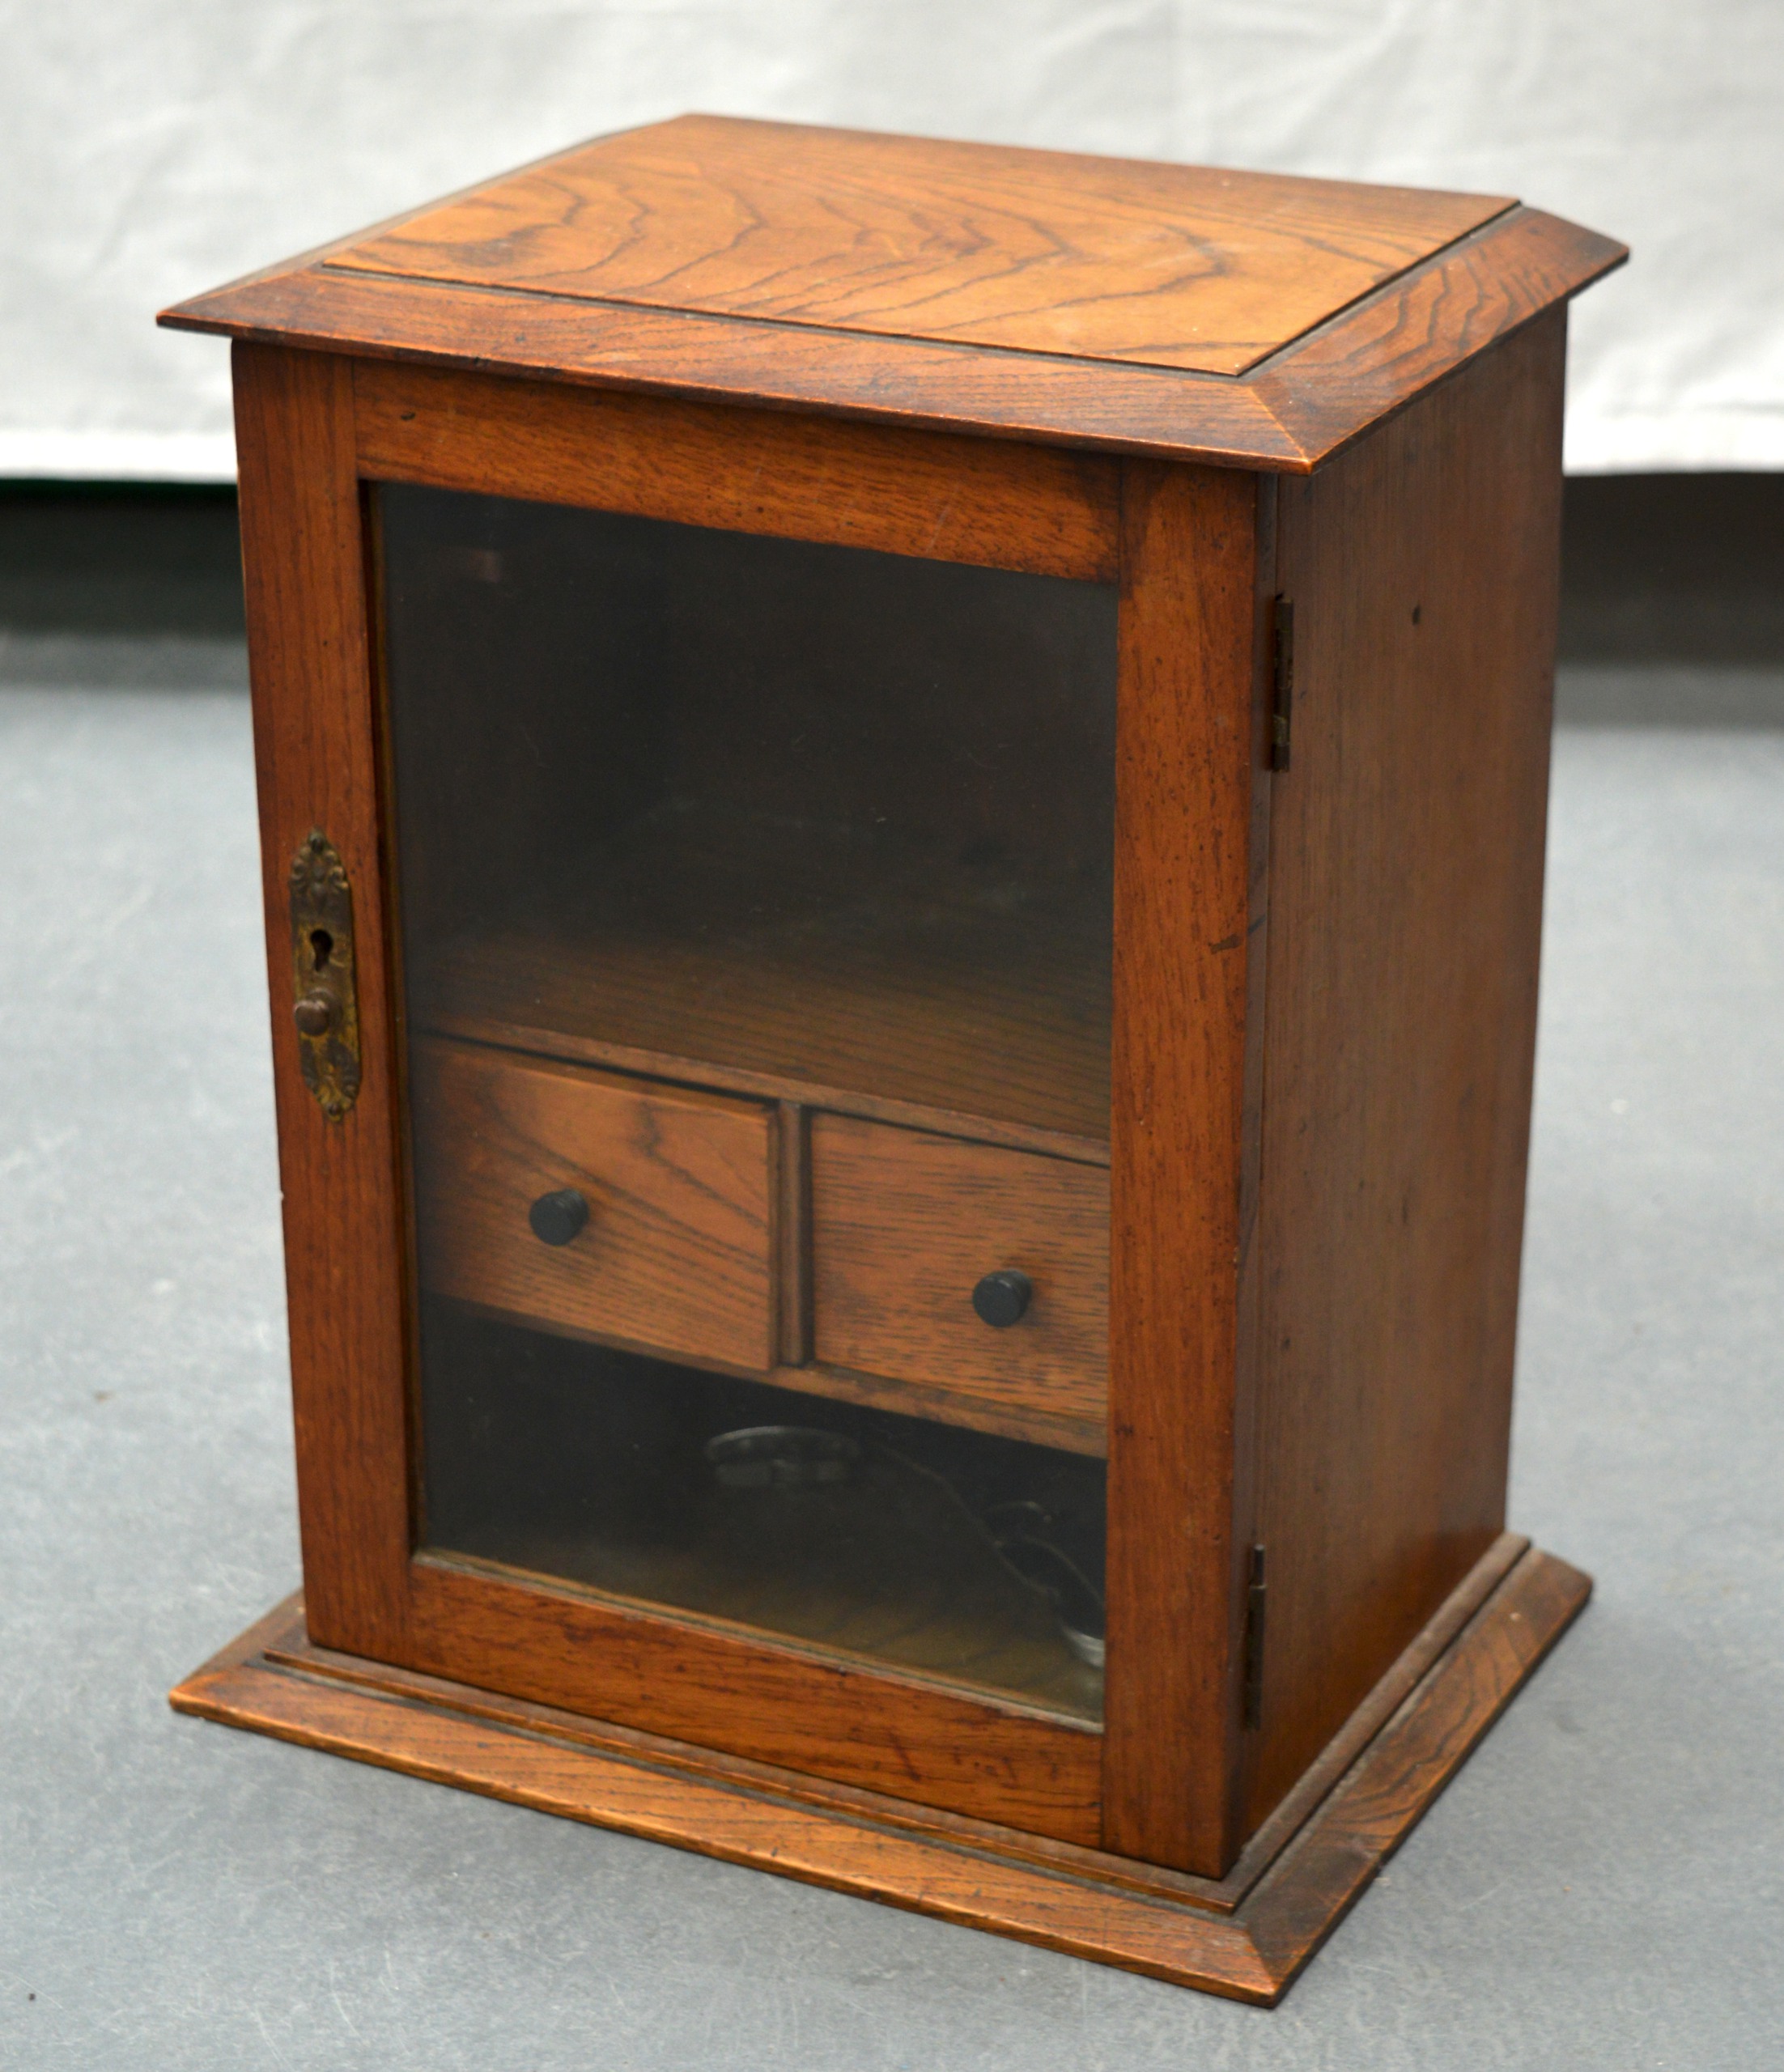 A SMALL OAK DISPLAY CABINET with two internal drawers. 1Ft 2ins x 11ins.